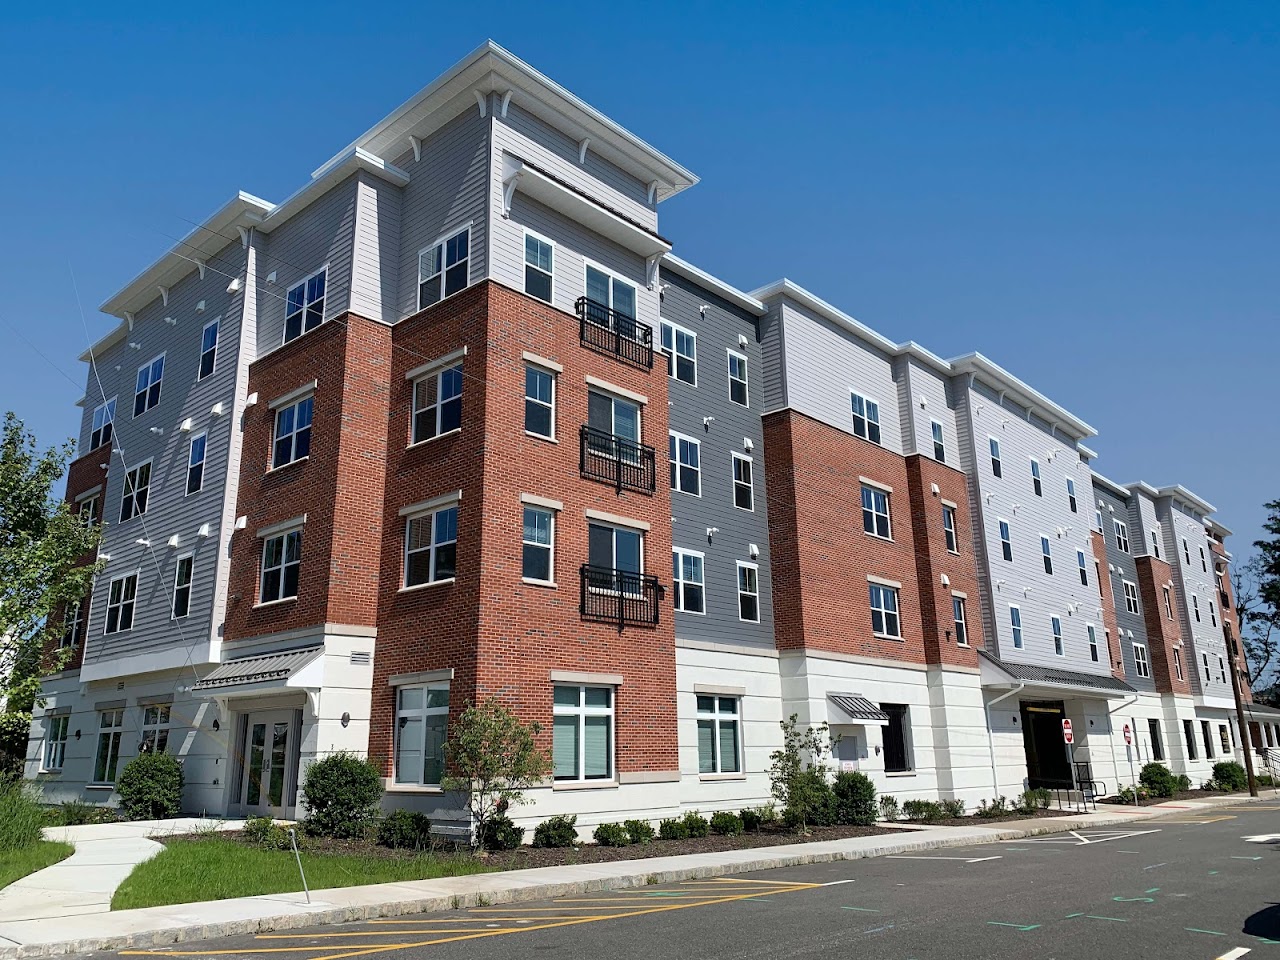 Photo of SPRUCE SENIOR. Affordable housing located at 1 SPRUCE STREET DOVER, NJ 07801